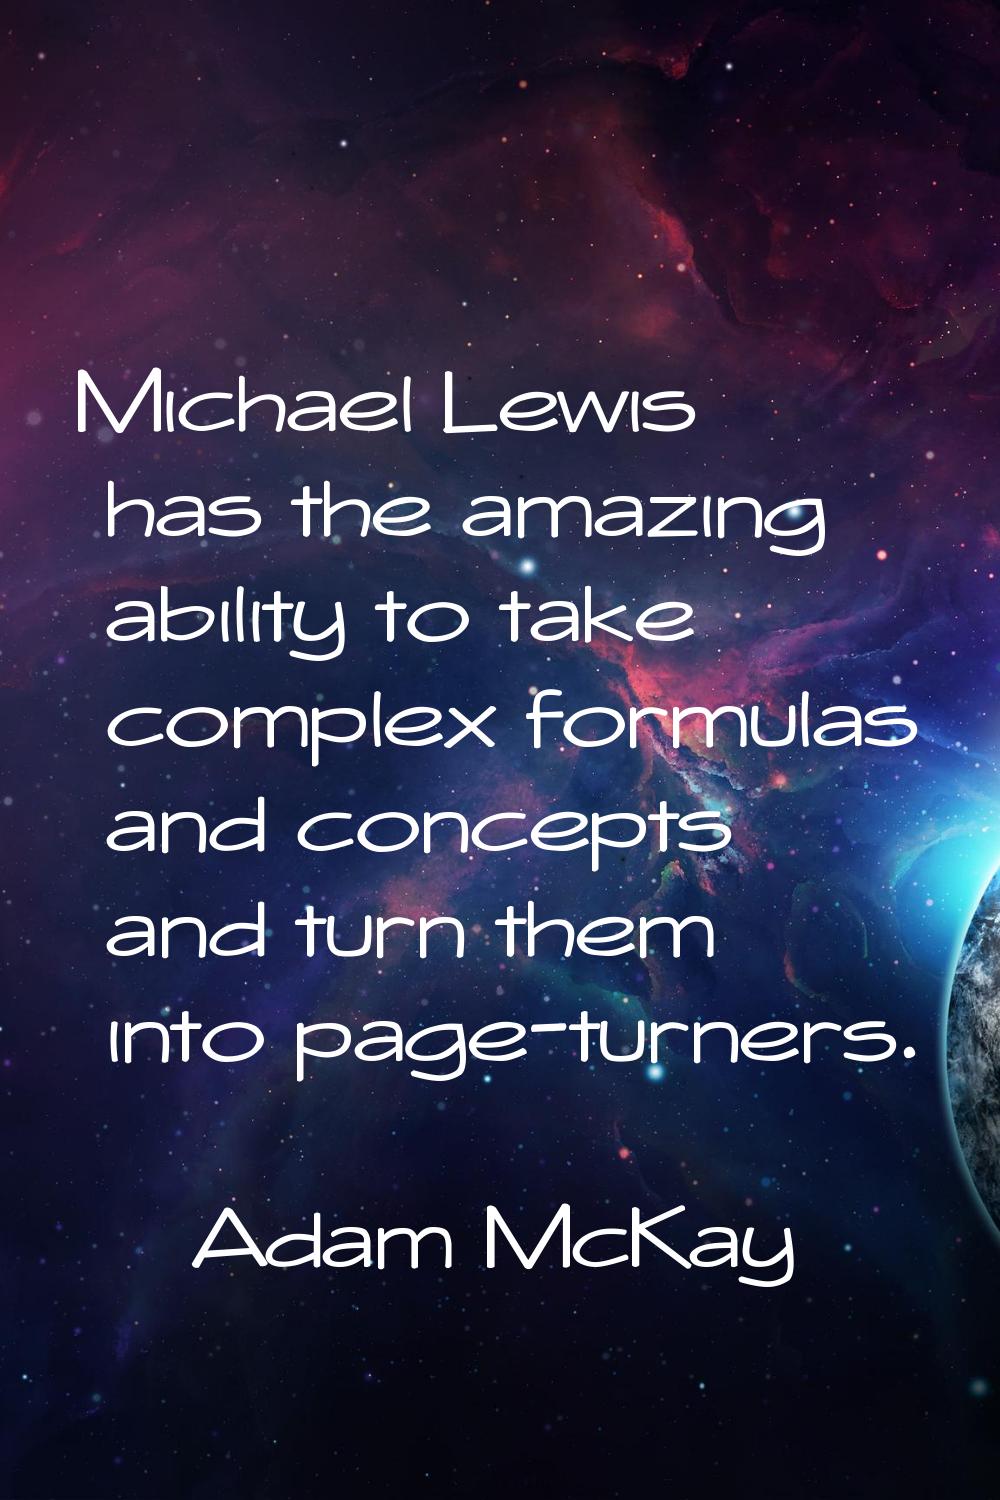 Michael Lewis has the amazing ability to take complex formulas and concepts and turn them into page